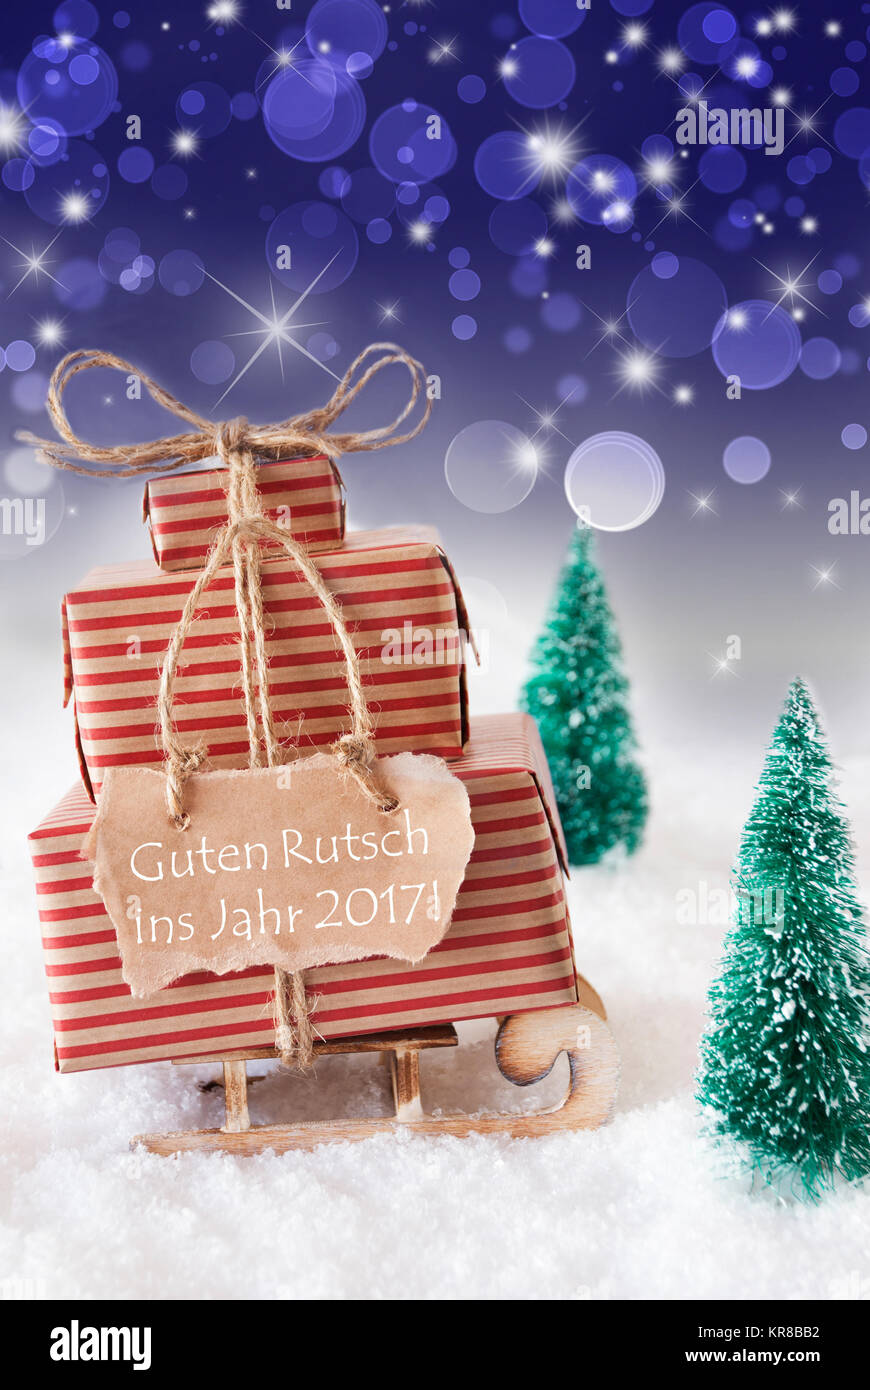 Vertical Image Of Sleigh Or Sled With Christmas Gifts, Snow And Trees. Blue Sparkling Background With Bokeh. Label With German Text Guten Rutsch Ins Jahr 2017 Means Happy New Year Stock Photo